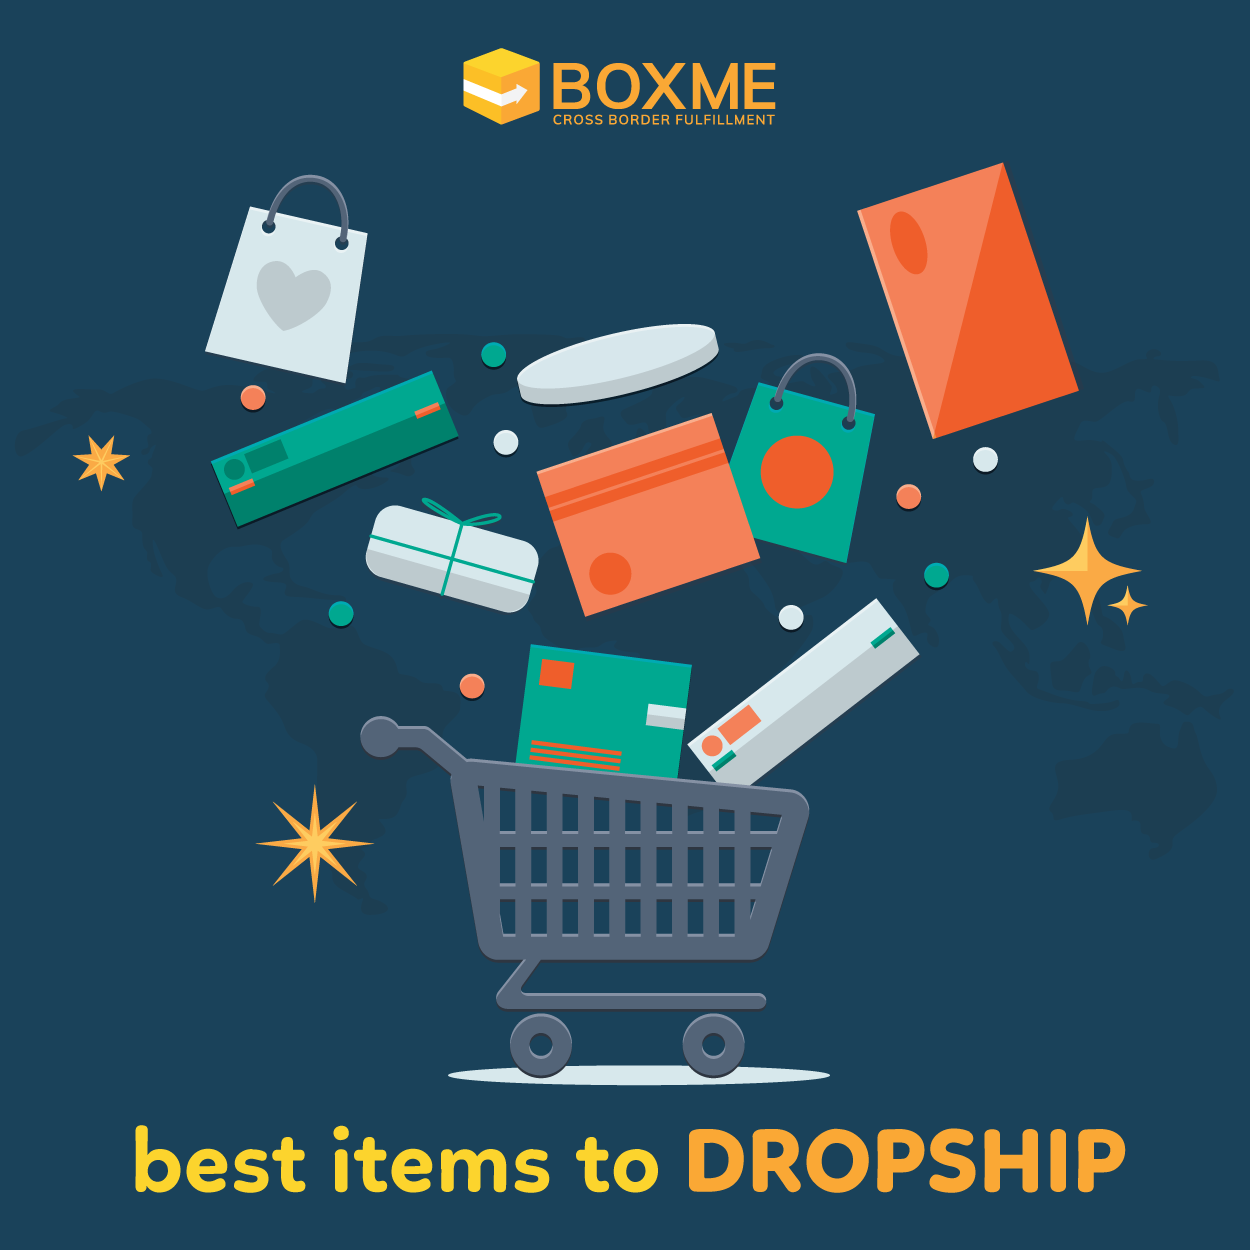 13 Best Items to Dropship in 2019 Boxme Global